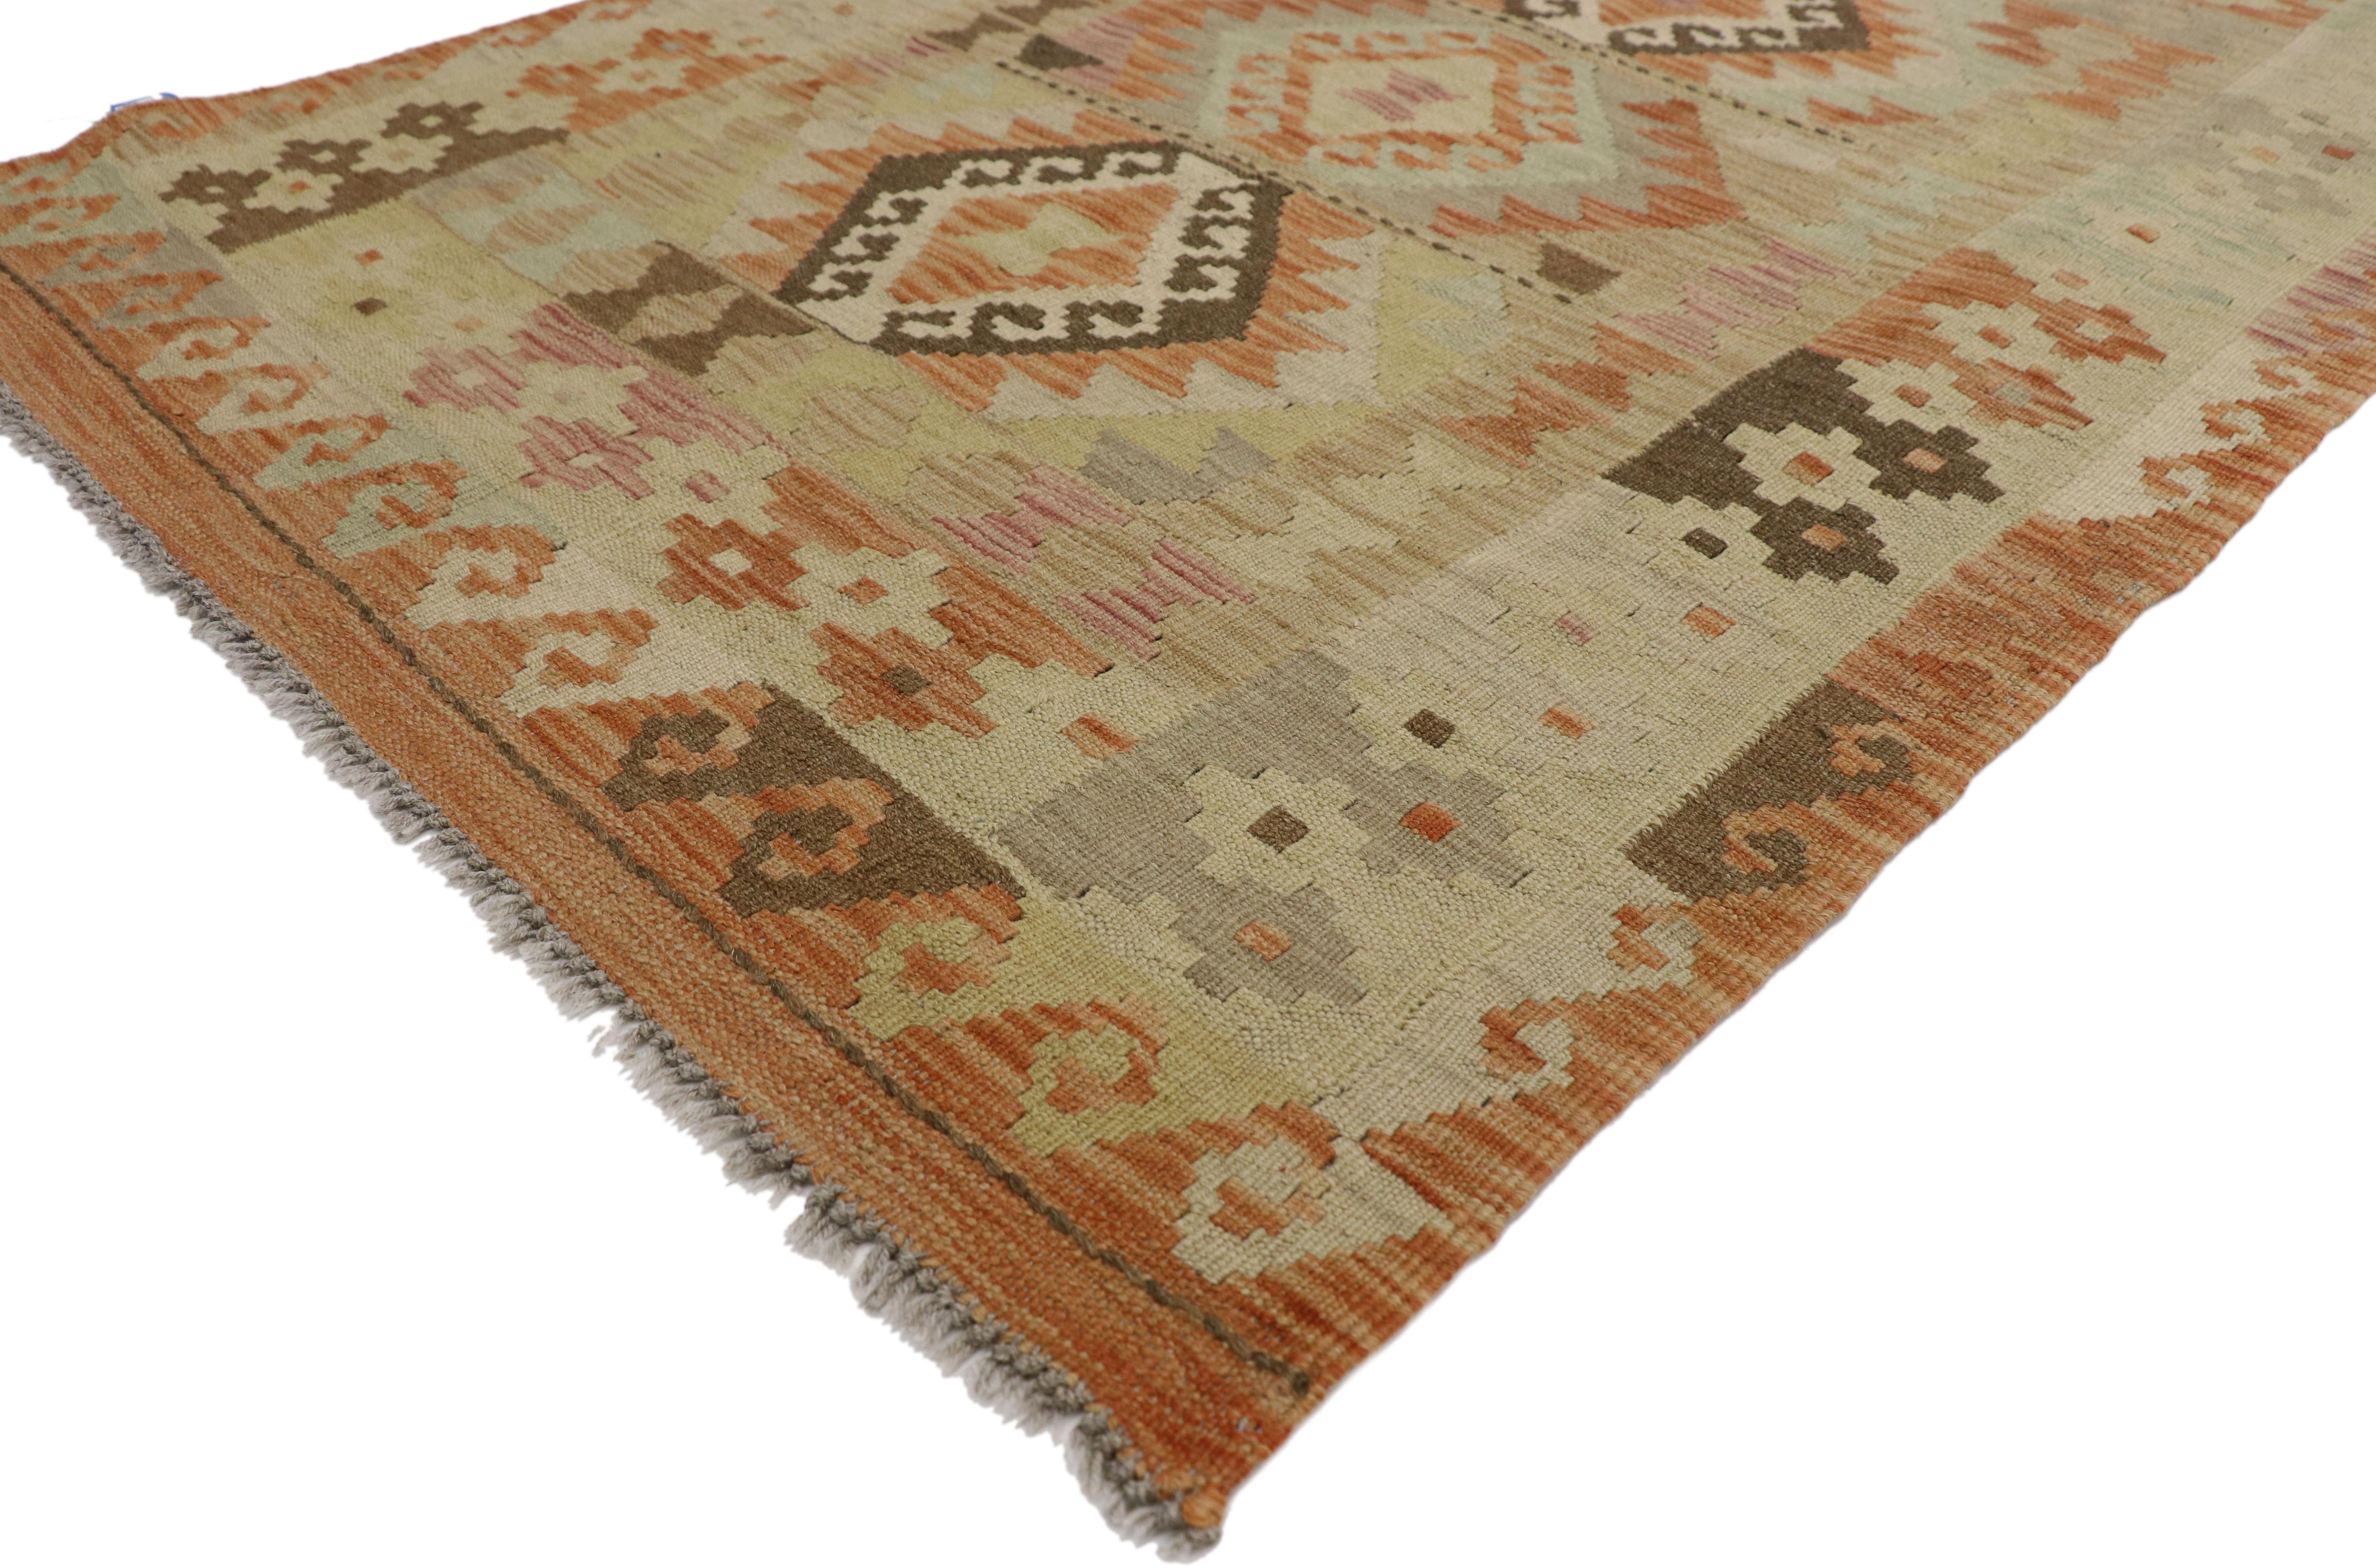 80140, boho chic vintage Afghani Shirvan kilim rug with tribal style. This handwoven wool Shirvan kilim rug features three hexagonal medallions in the style of Turkish guls. The interior field is lined with cruciform figures and a band patterned